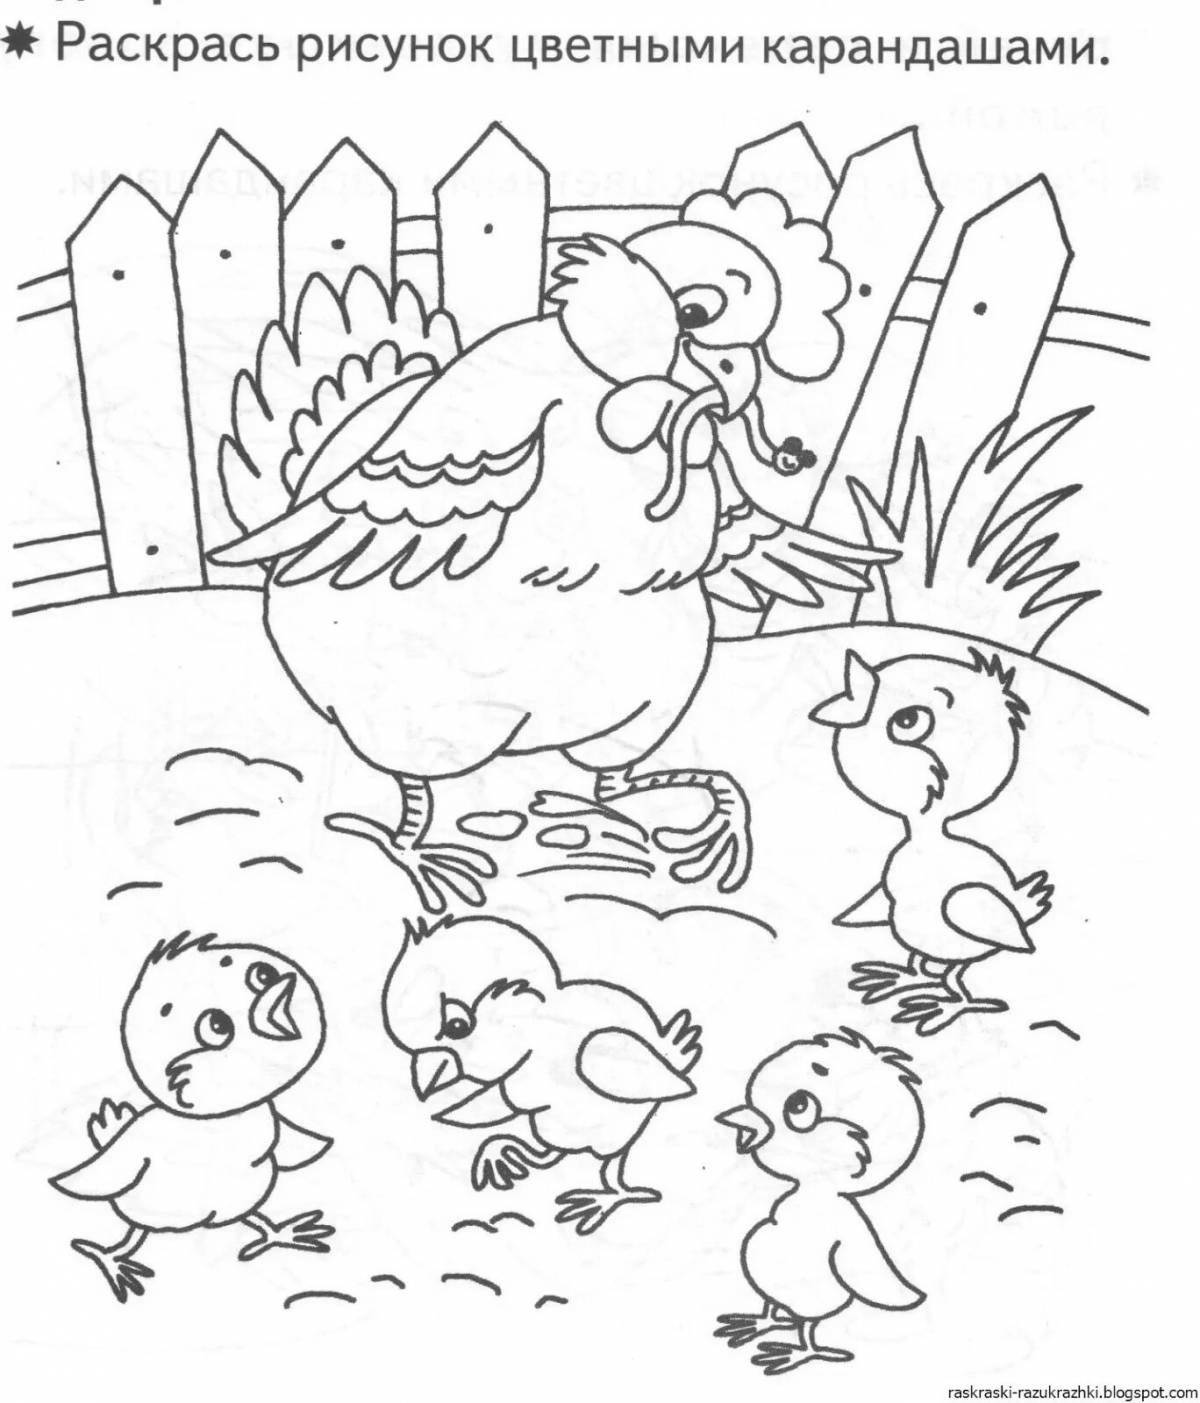 Outstanding poultry coloring page for kids